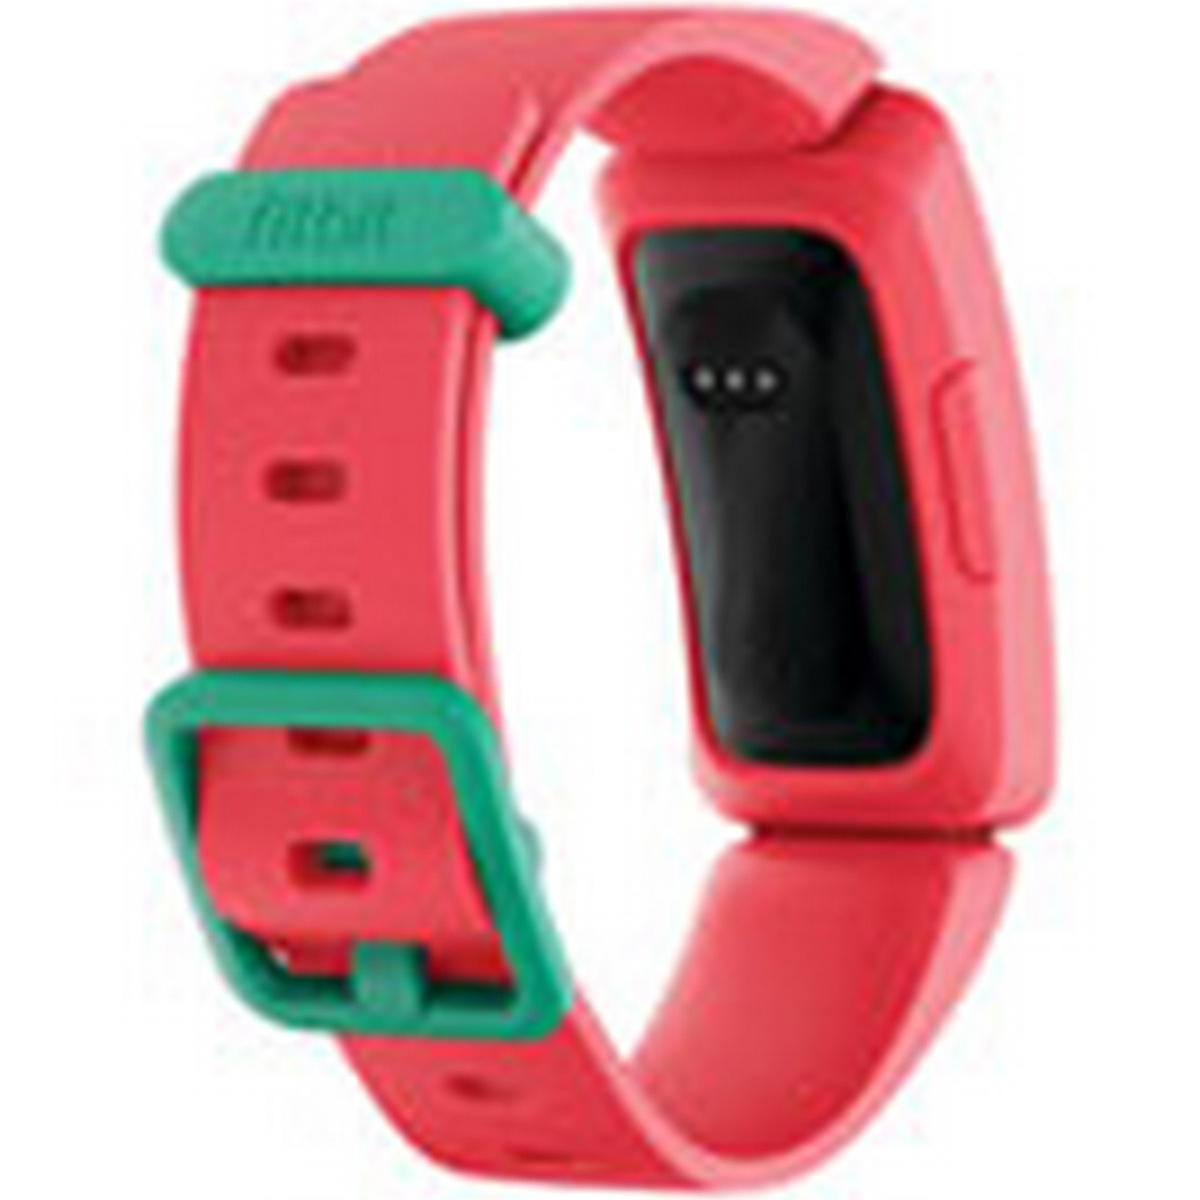 Fitbit Ace 2 Watermelon/Teal Fitness Band for Kids Online at Best Price ...